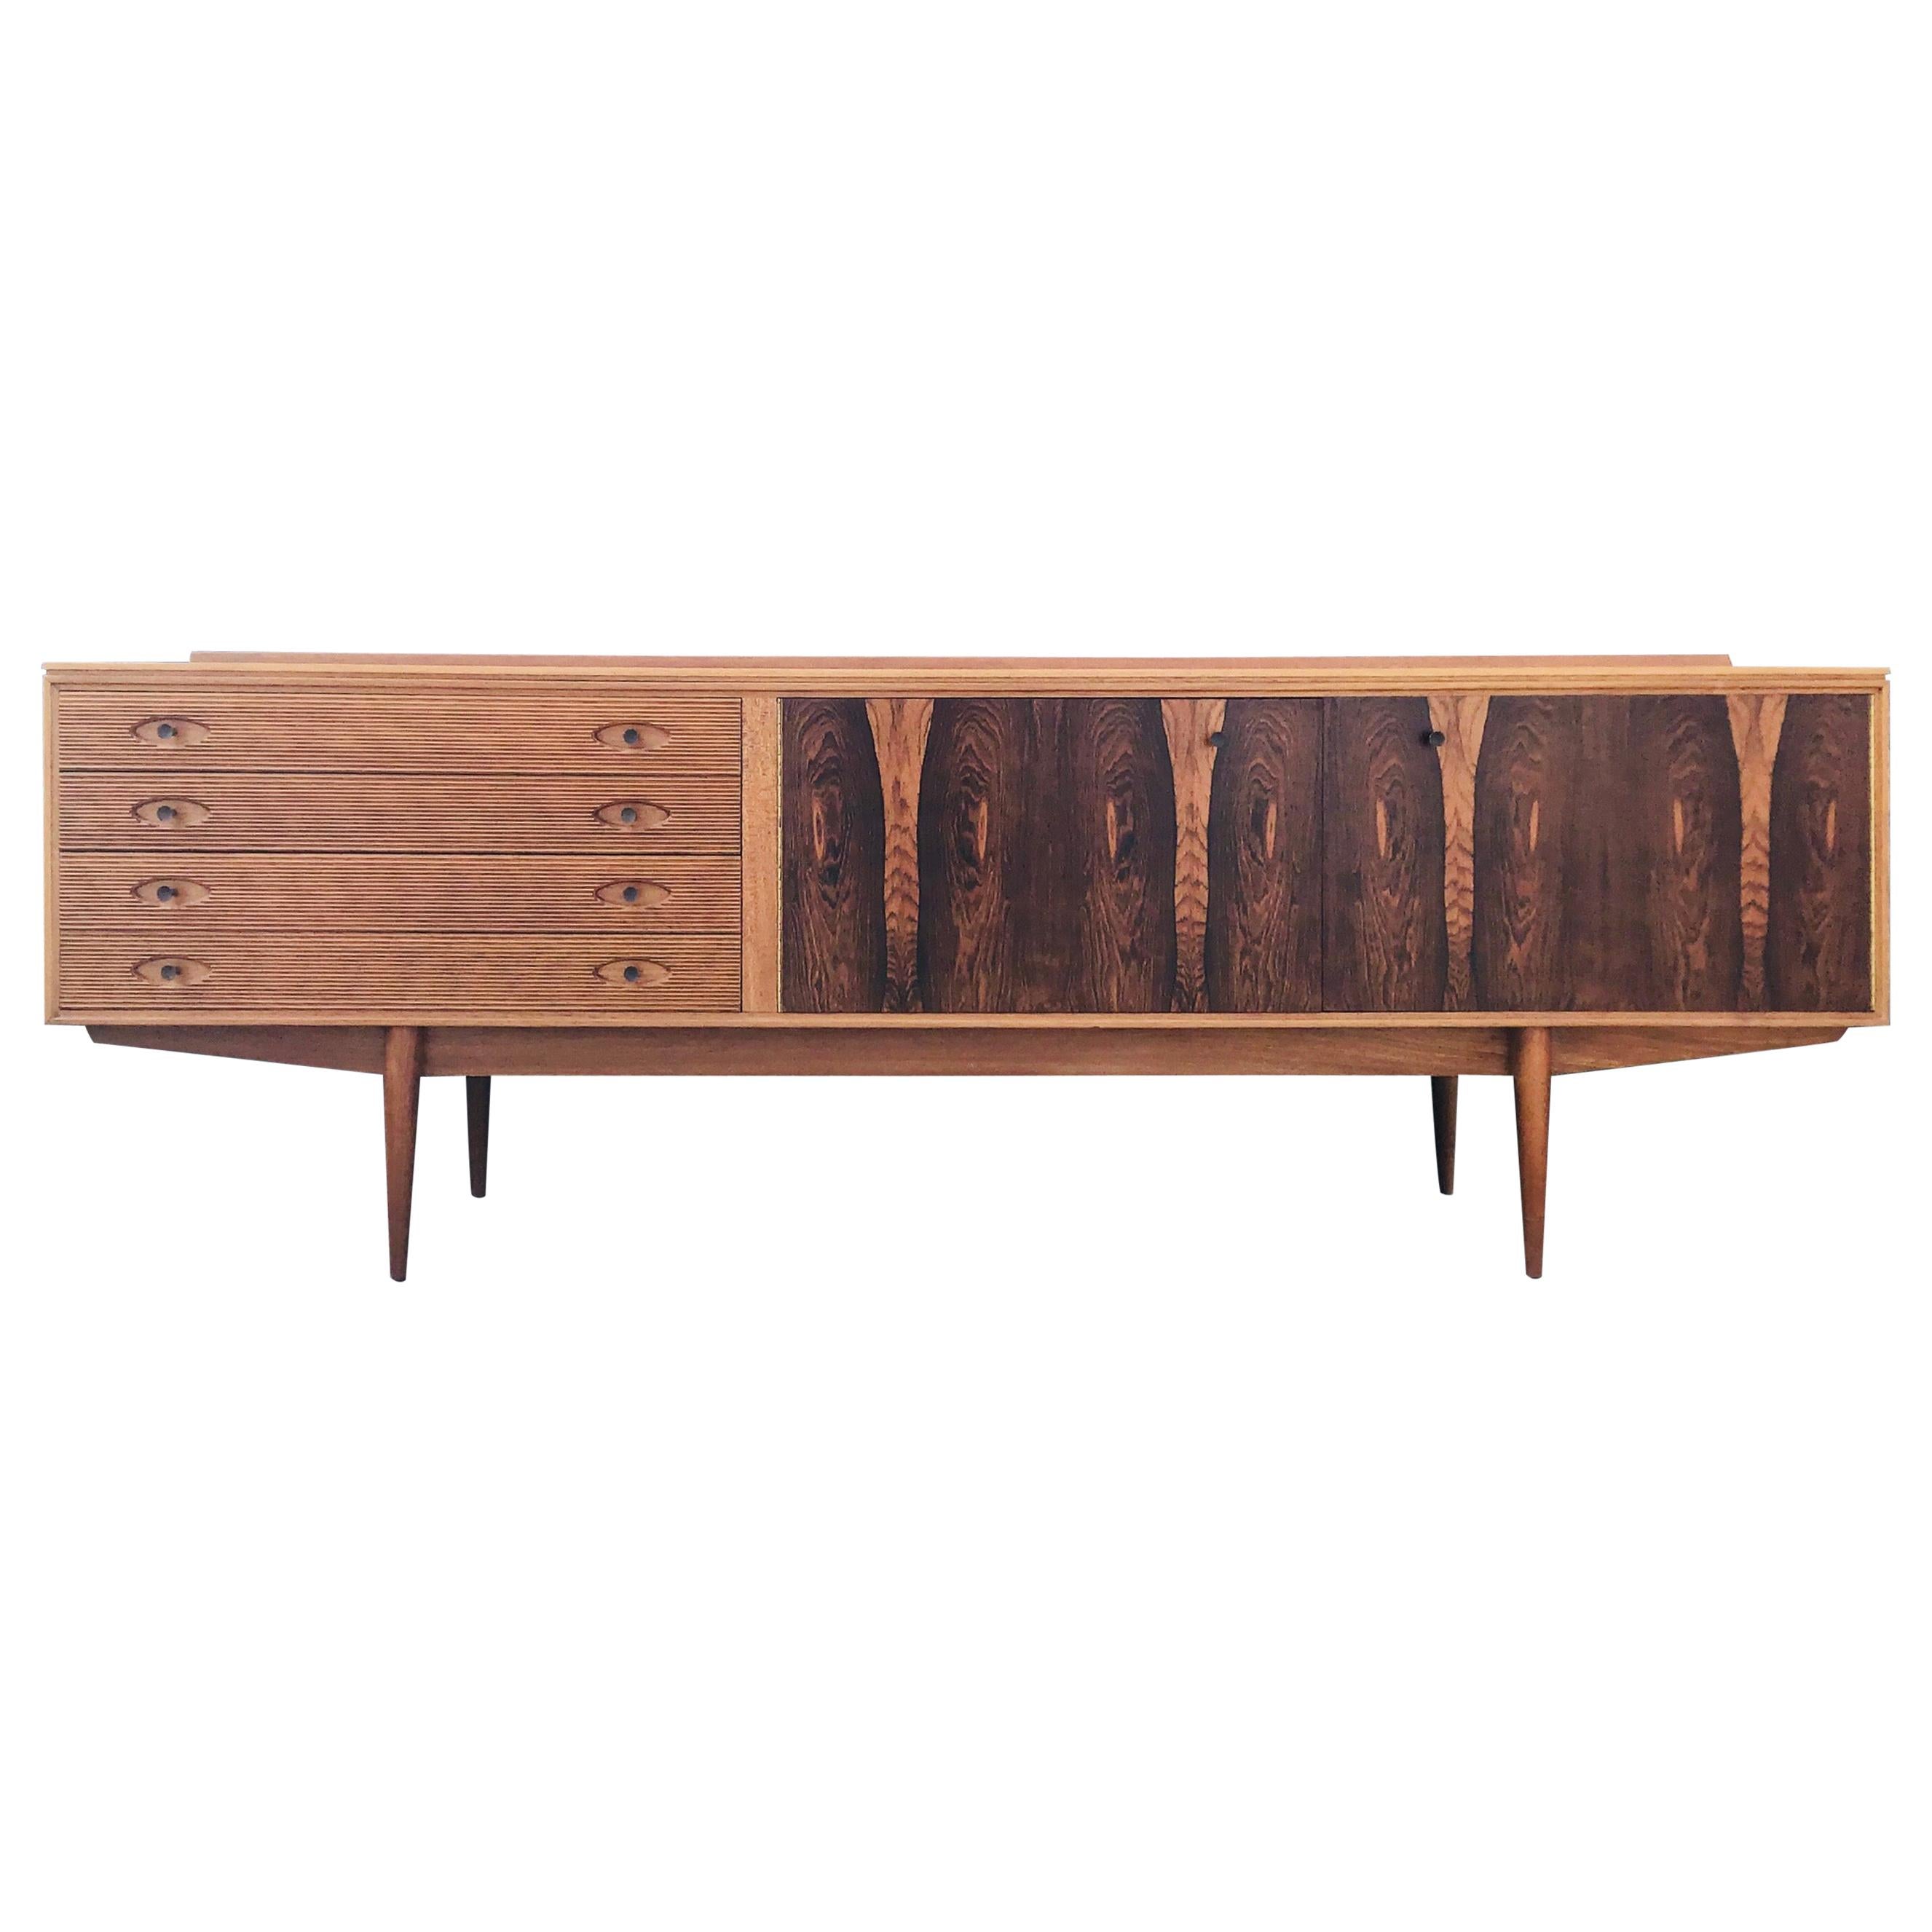 Rodent Heritage Sideboard for Archie Shine